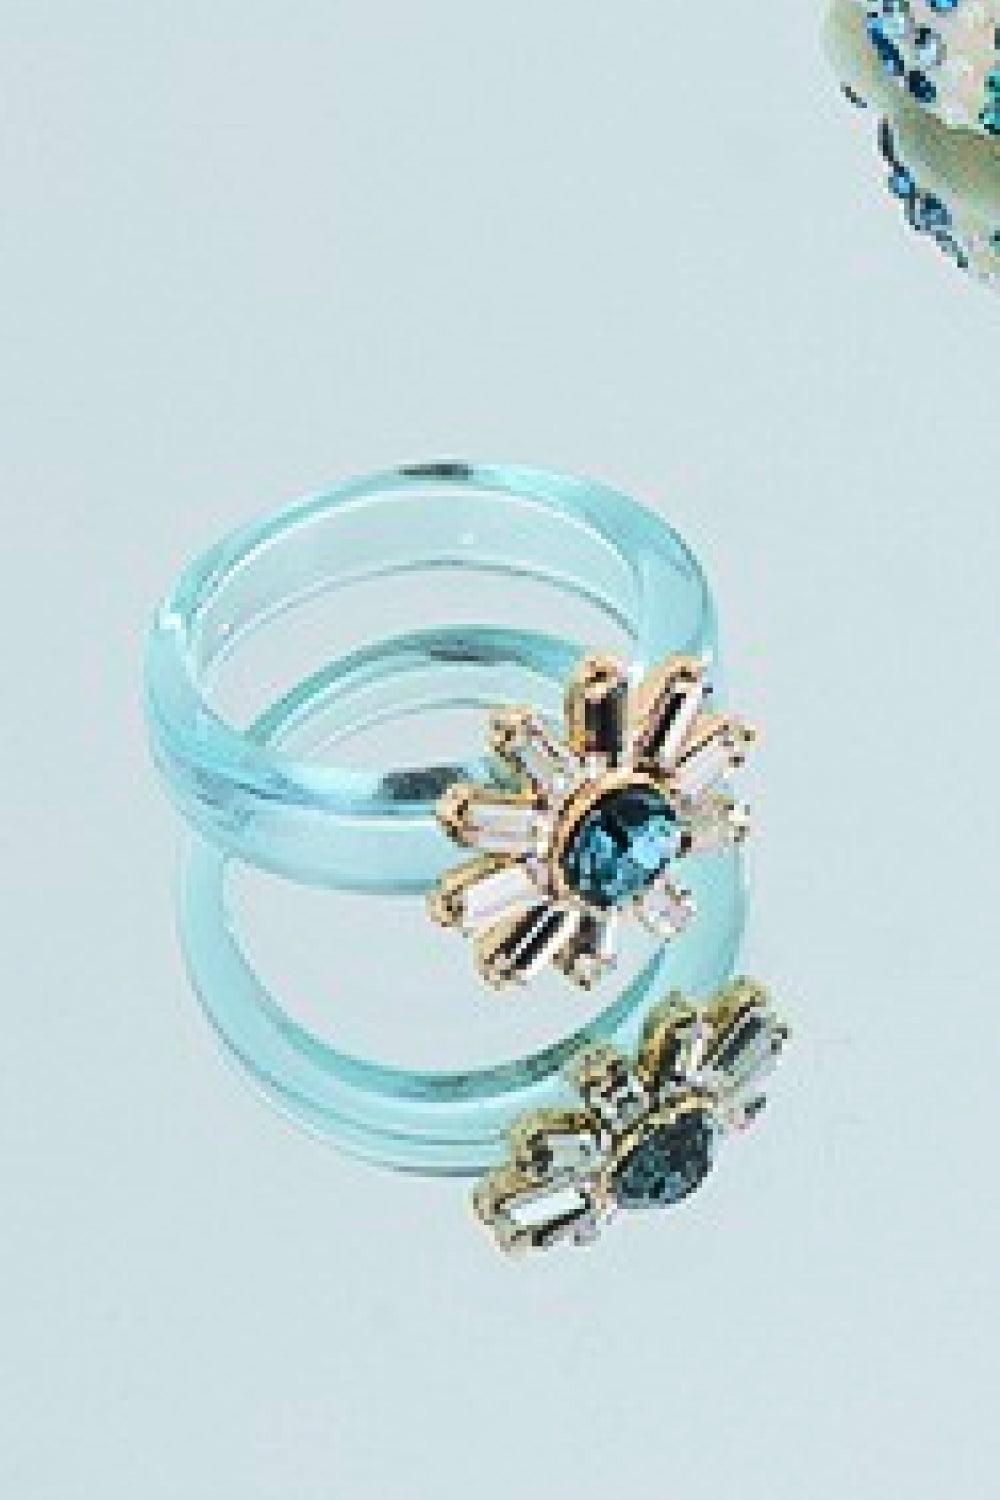 Only With You Sunflower Ring - Trendha